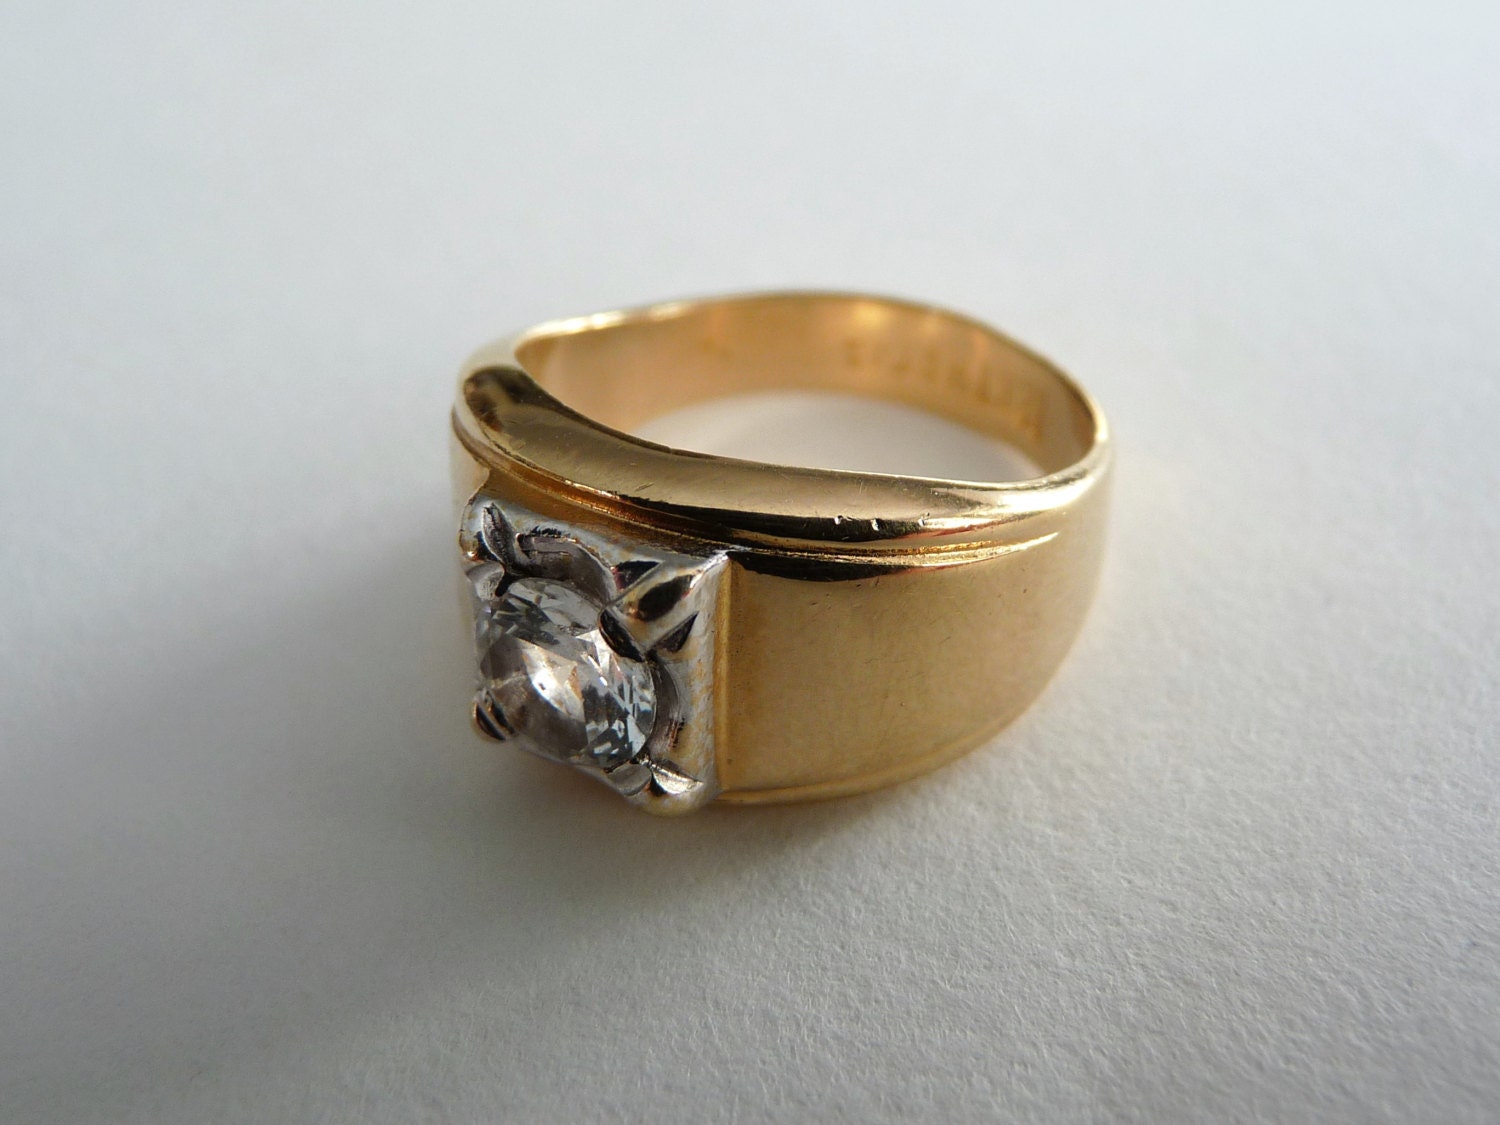 Vintage 18 KT HGE Gold Bling Ring with Diamond like by bookedge